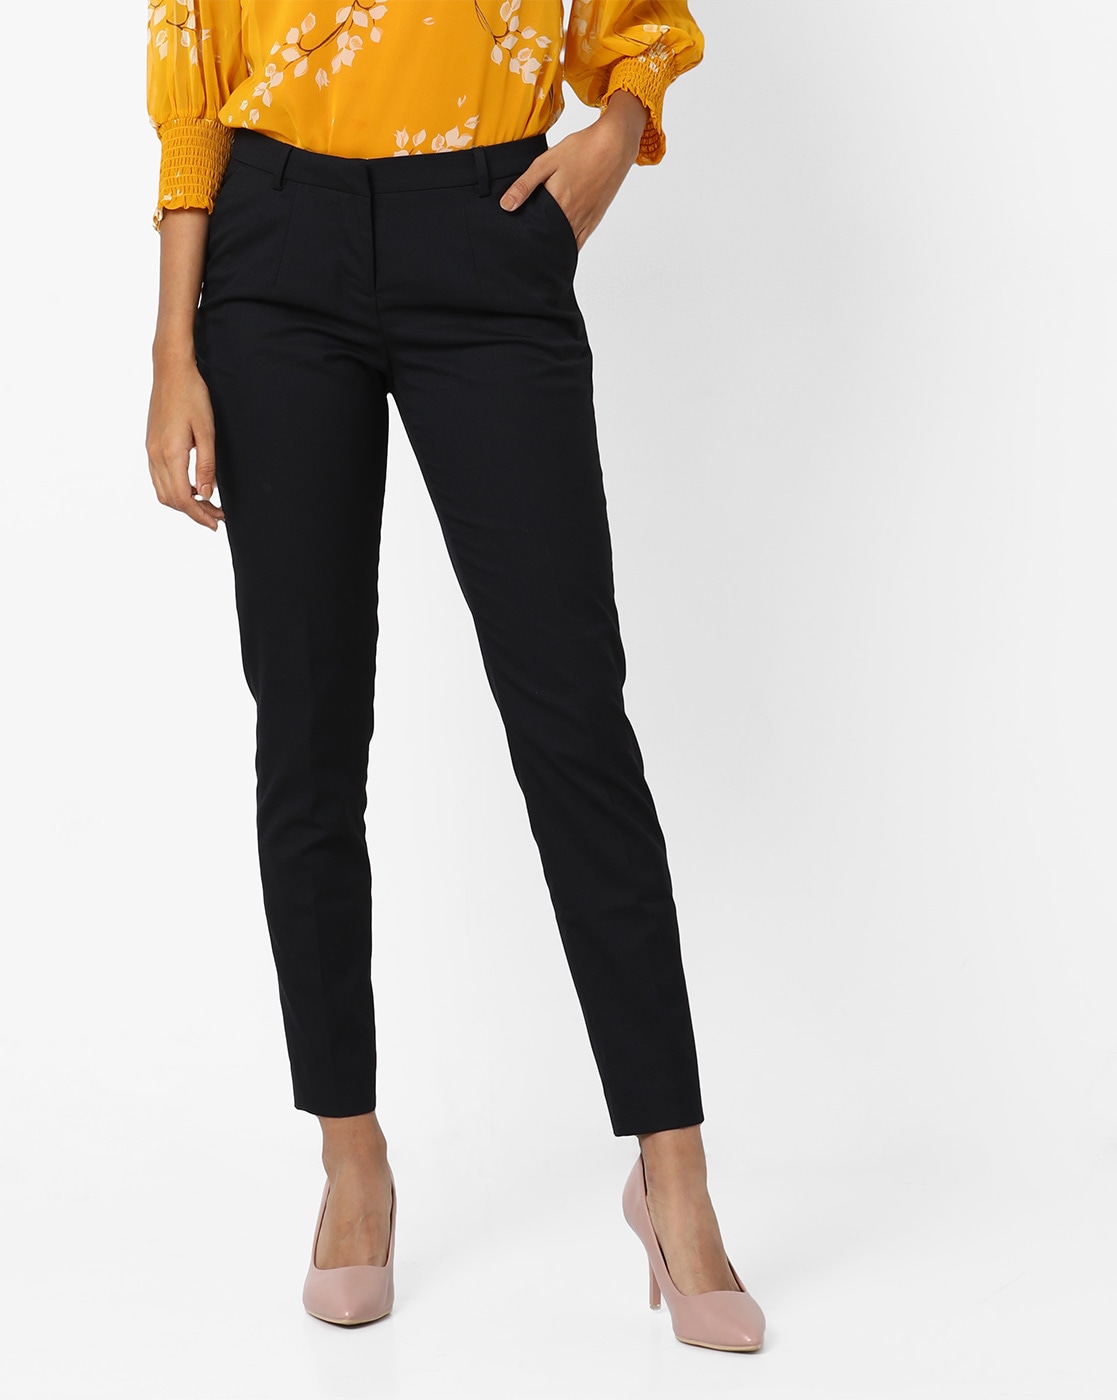 Buy Wills Lifestyle Women Navy Blue Slim Fit Solid Formal Trousers   Trousers for Women 2093916  Myntra